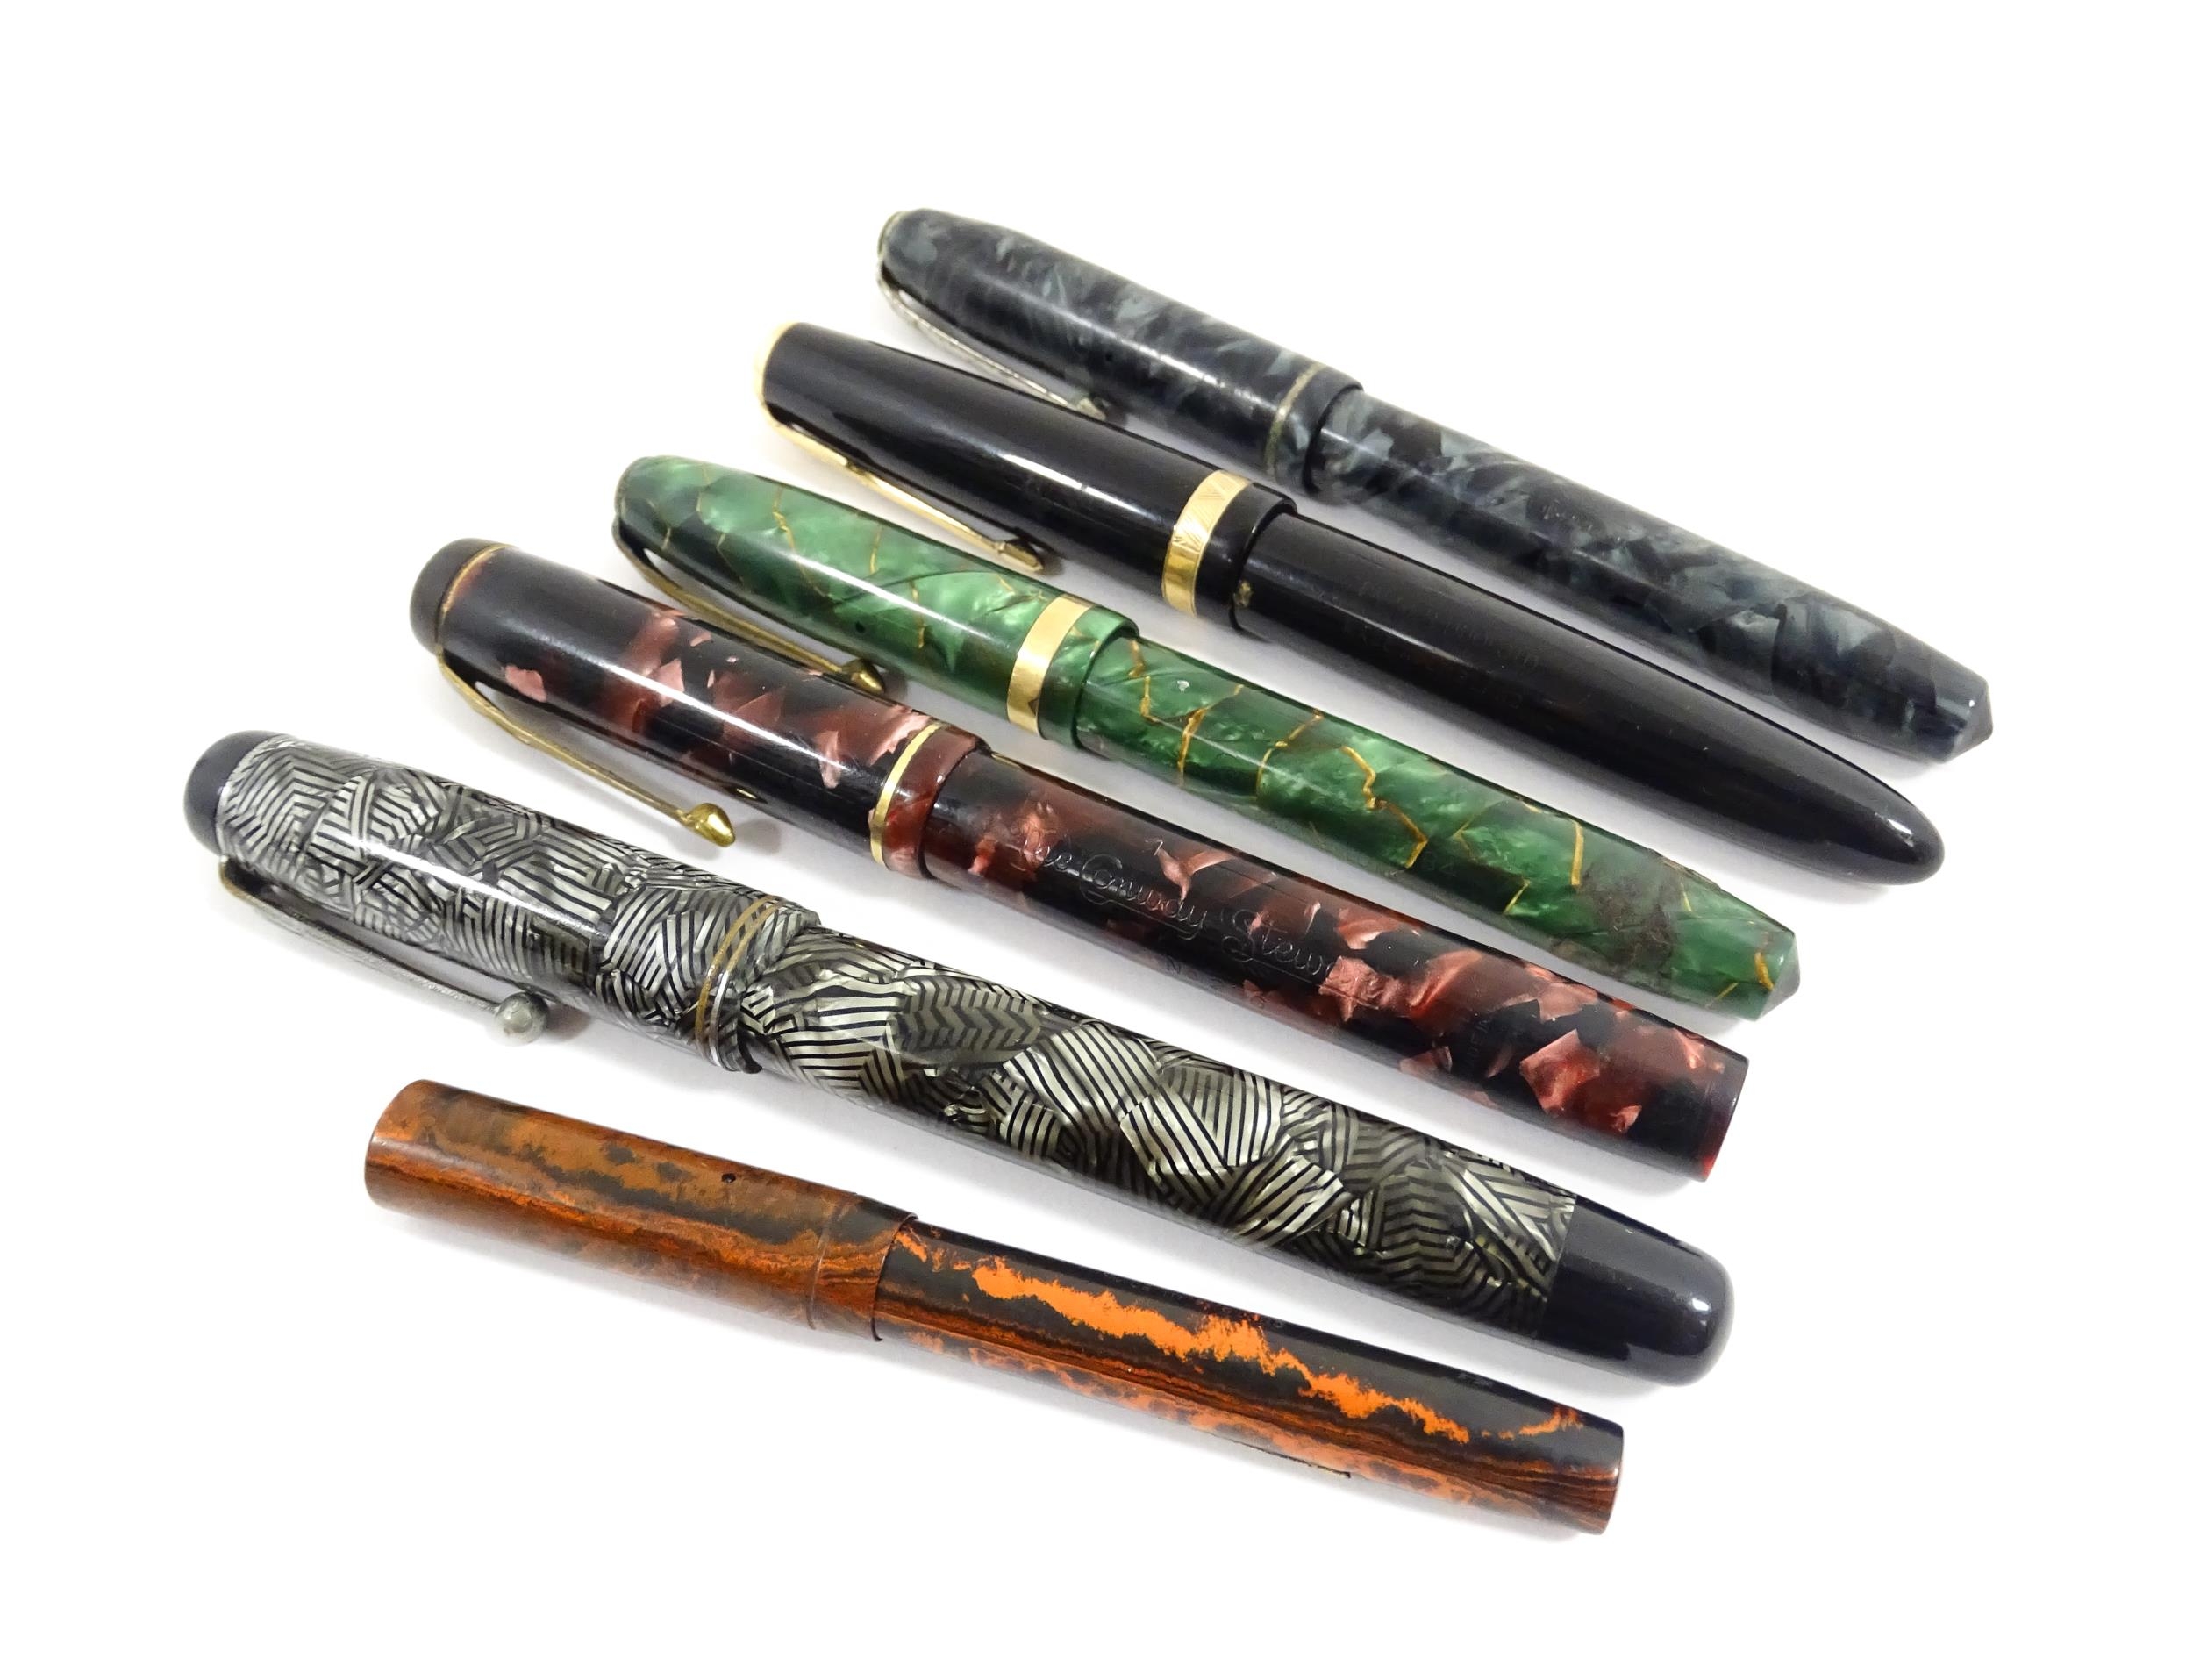 Six fountain pens with 14ct nibs, to include a Parker 'Duofold' with black finish and 14kt gold nib, - Image 3 of 22